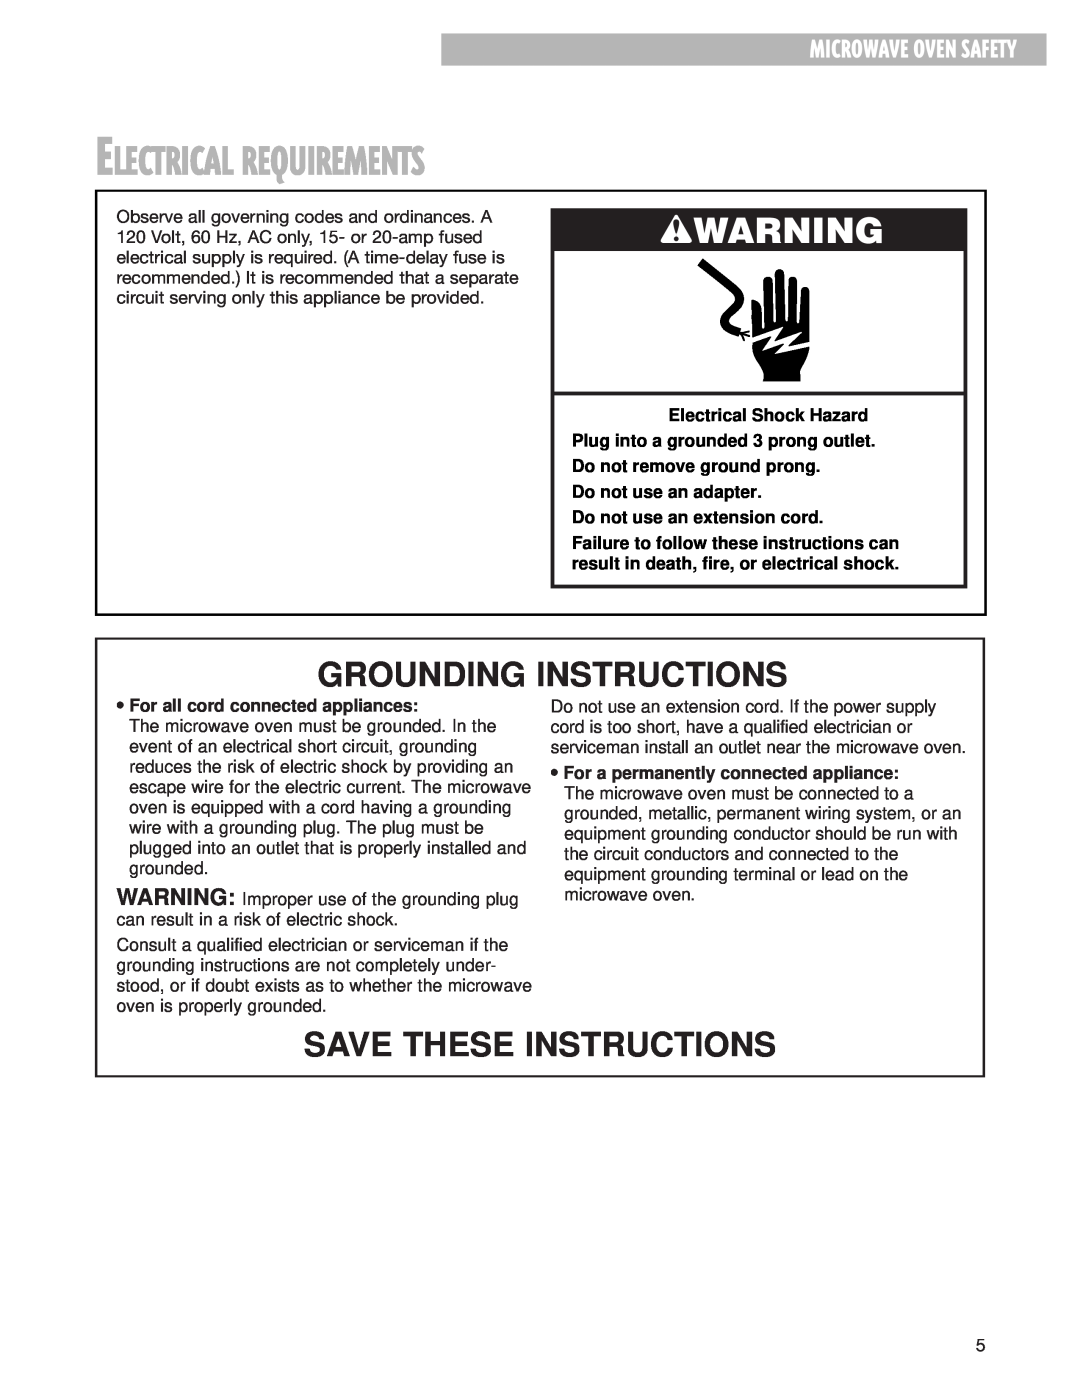 Whirlpool MH8150XJ Electrical Requirements, wWARNING, Grounding Instructions, Do not use an extension cord 